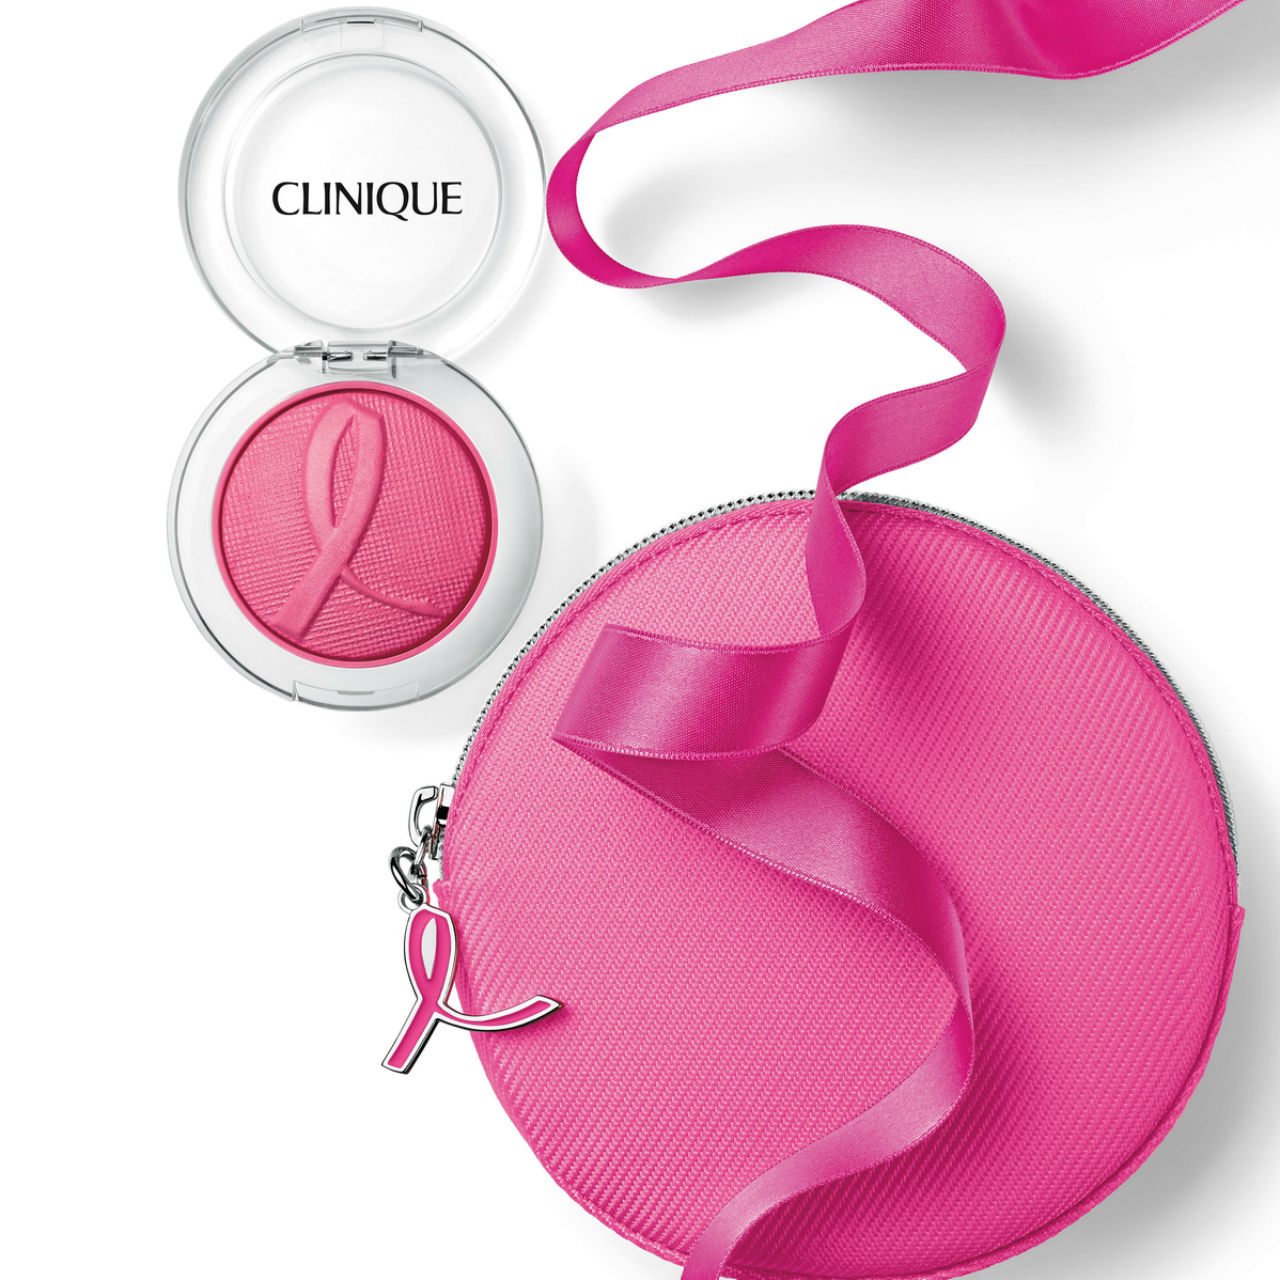 Clinique_Pink with a Purpose Cheek Pop with Bag